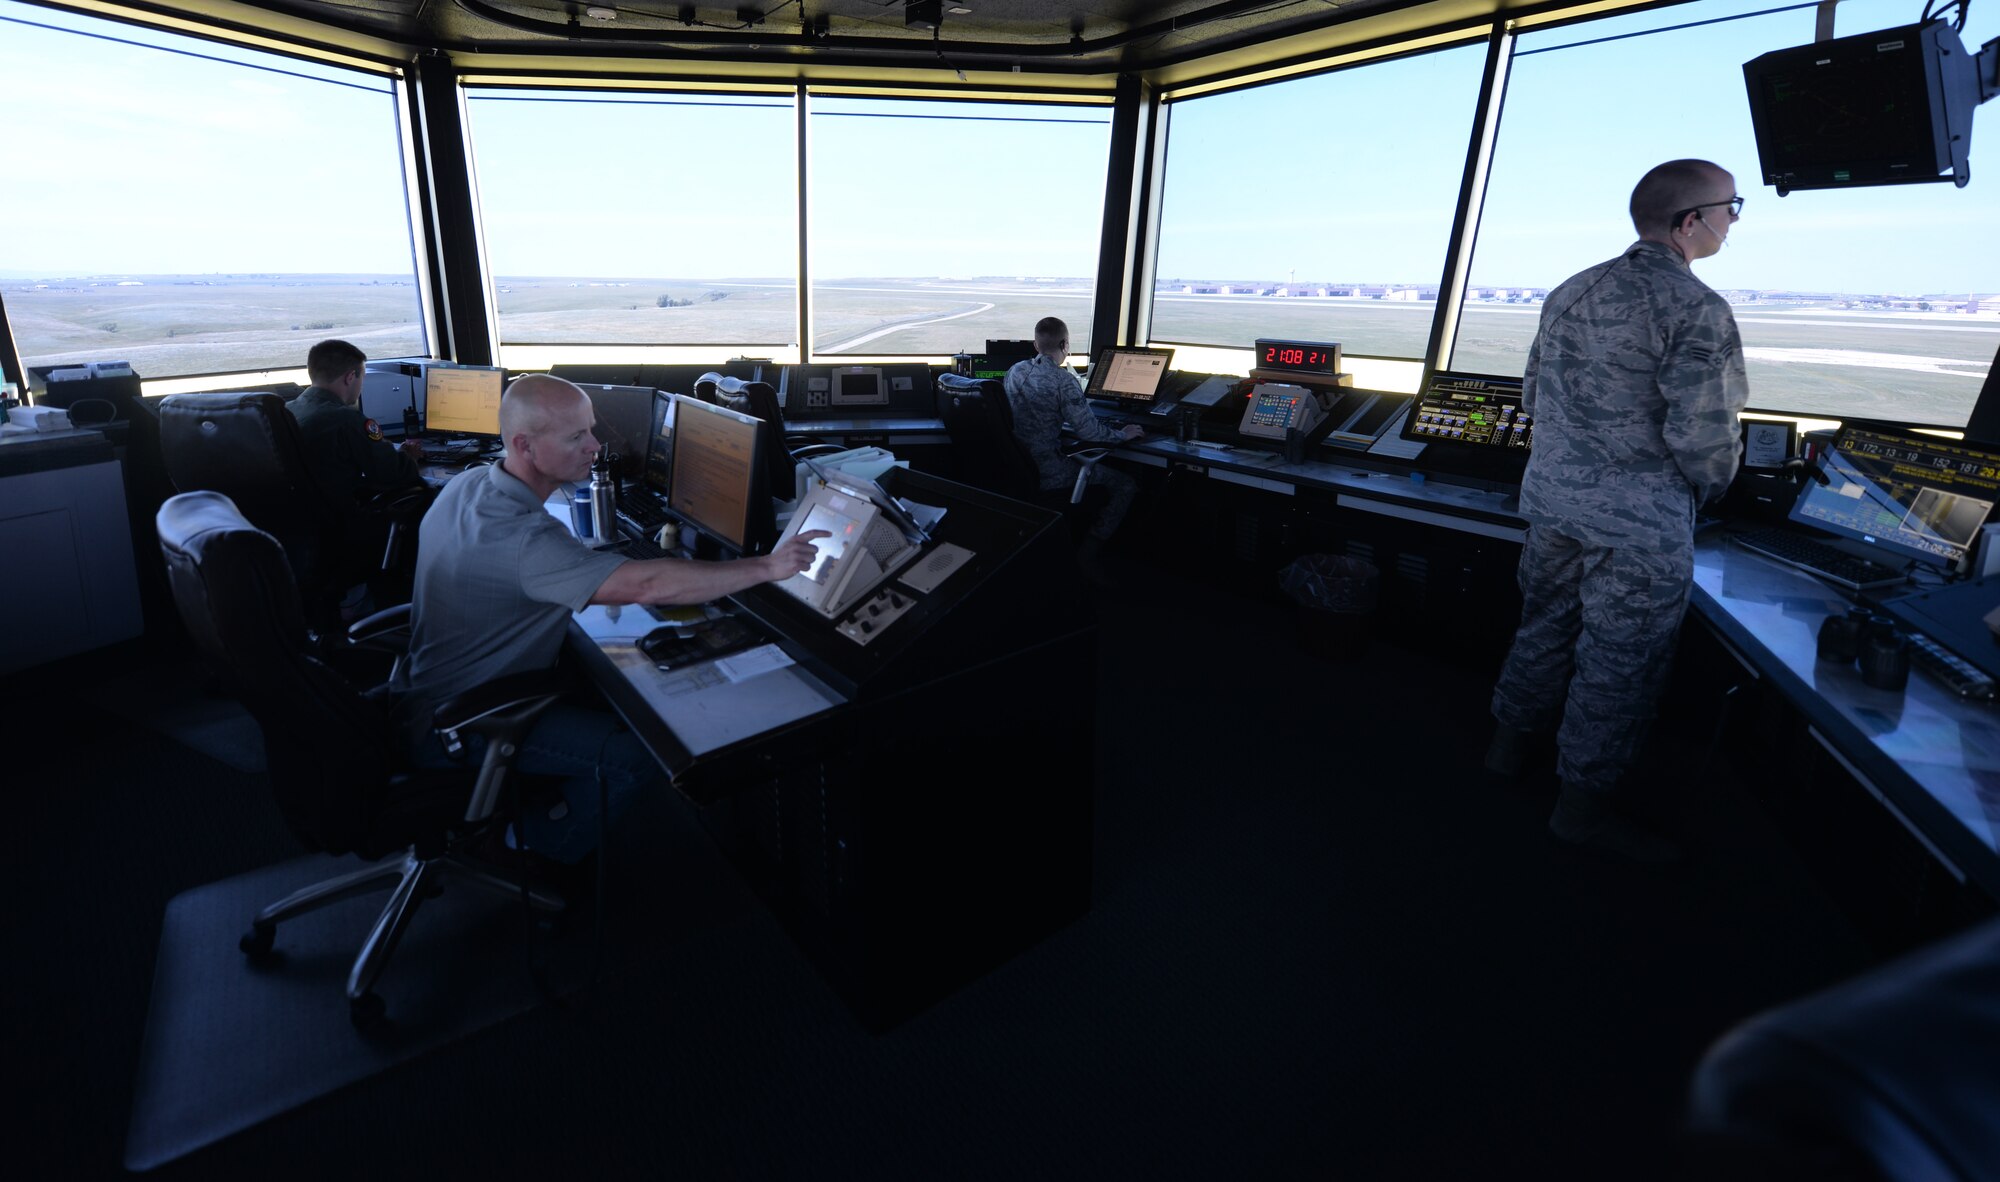 The 28th Operations Support Squadron air traffic control tower’s swing shift team works to coordinate safe travel on the flight line at Ellsworth Air Force Base, S.D., July 10, 2018. Air traffic controllers are qualified to work on both the tower, which coordinates movement on the flight line, and the radar approach control team, which coordinates aircraft movement in the sky. (U.S. Air Force photo by Airman 1st Class Nicolas Z. Erwin)